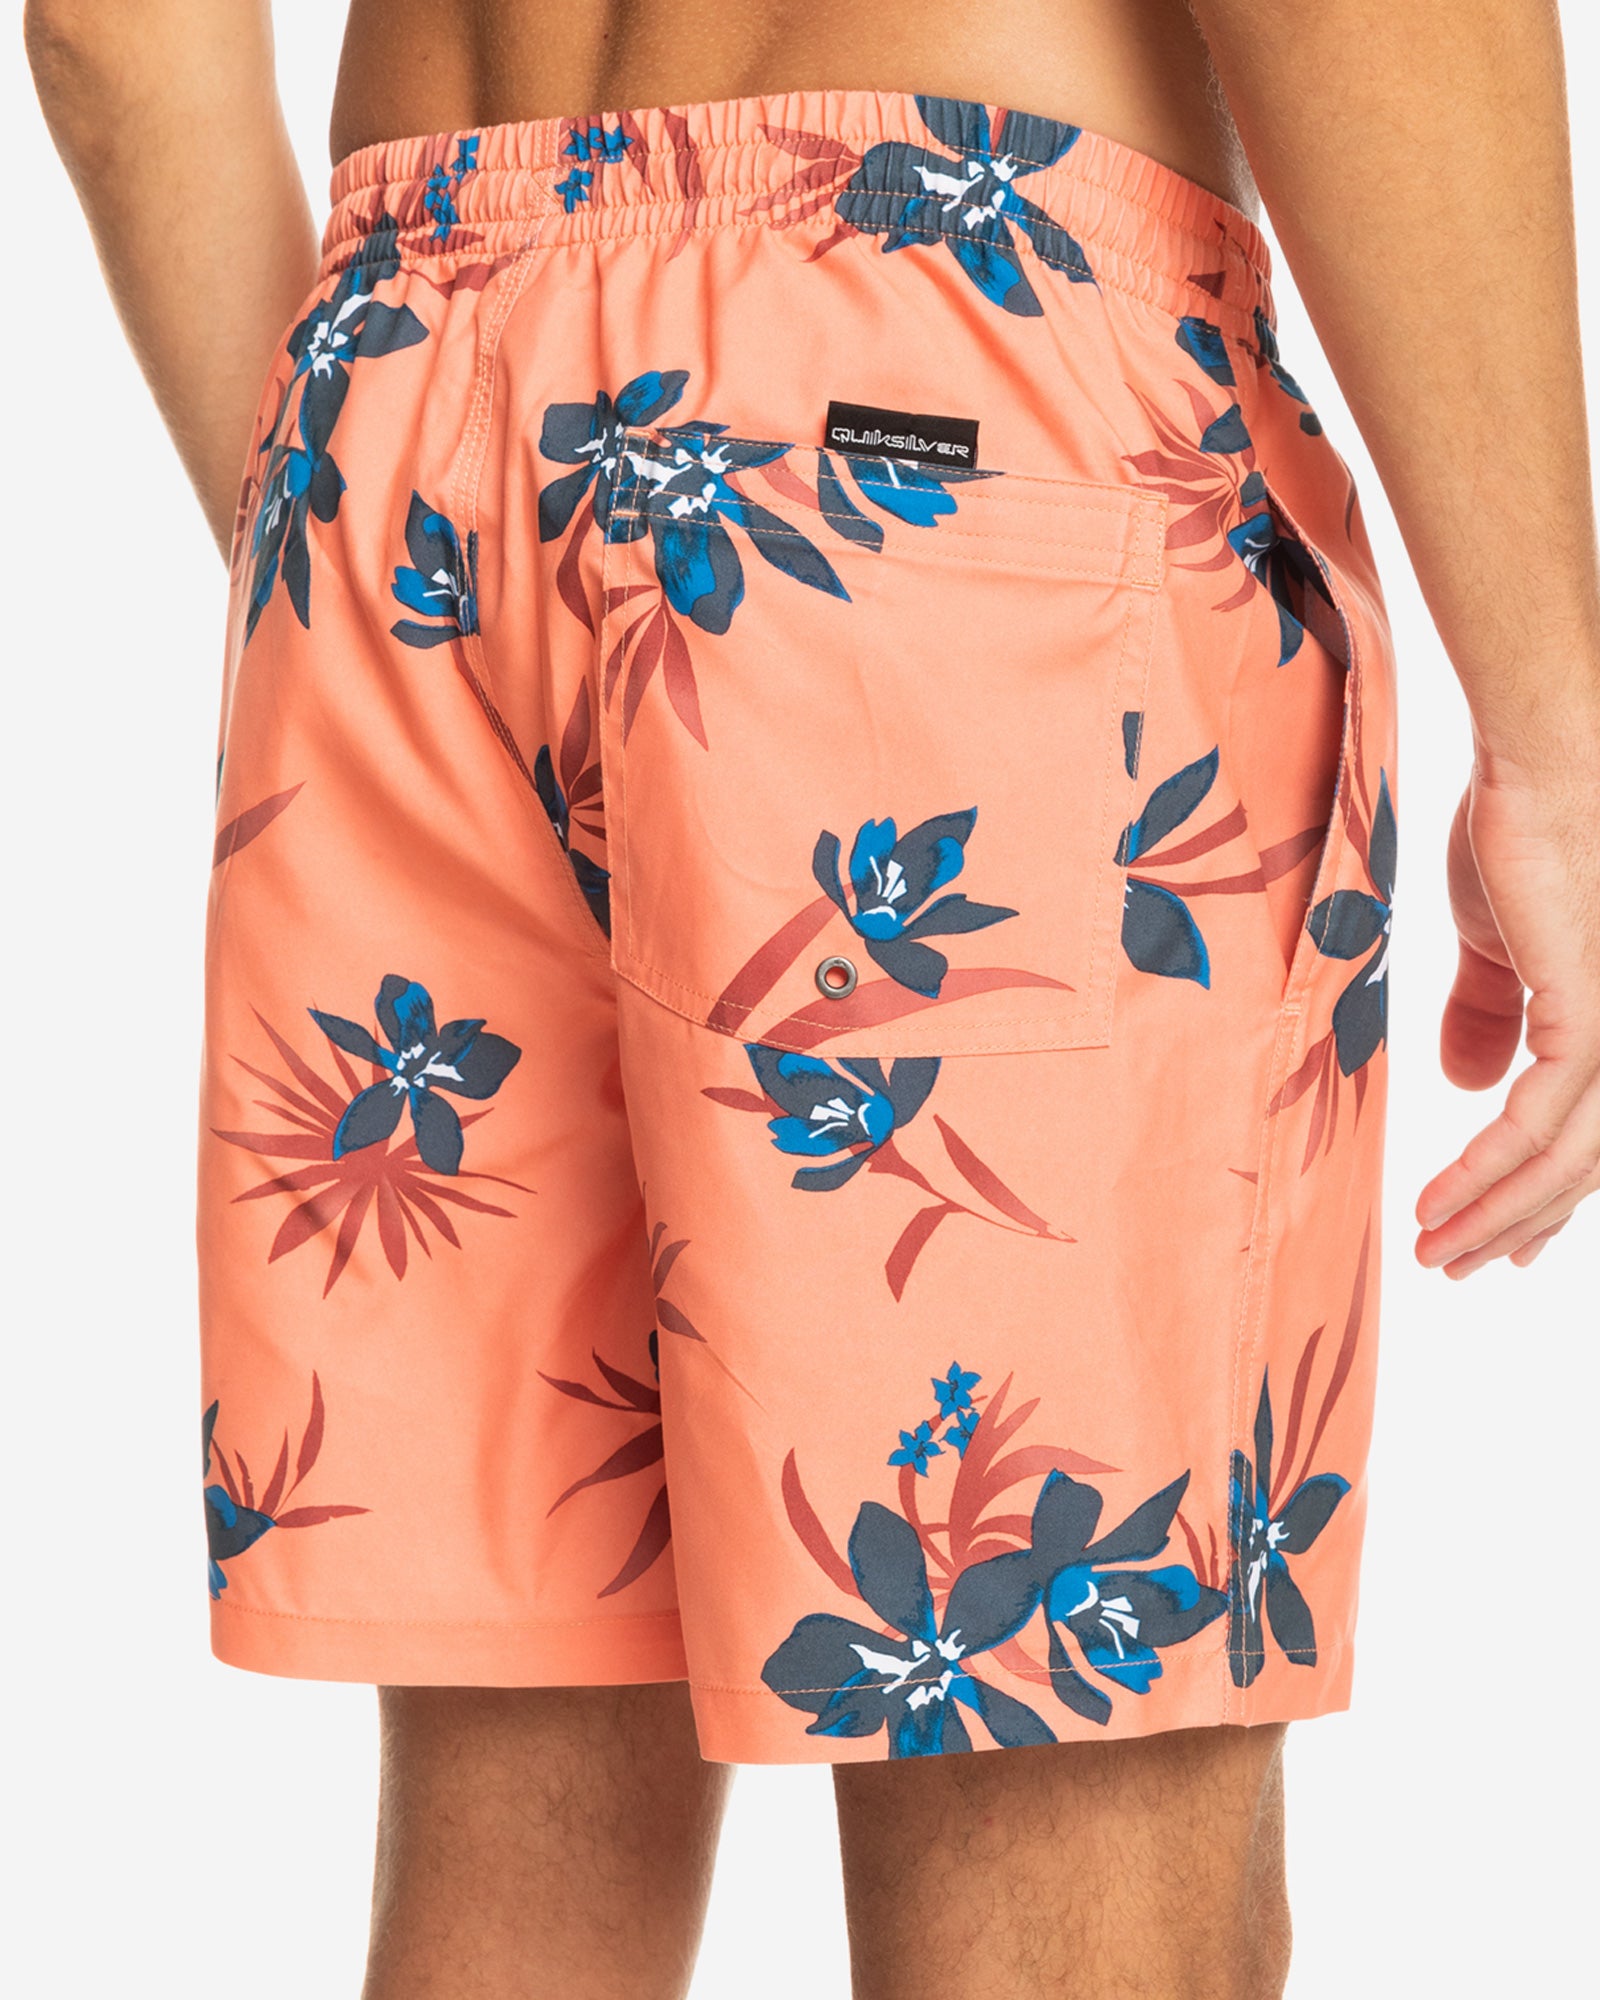 The Everyday Mix Swim Short is your passport to paradise. The eco-conscious fabric is backed with a tropical print that's primed for ocean, pool, and lake adventures.